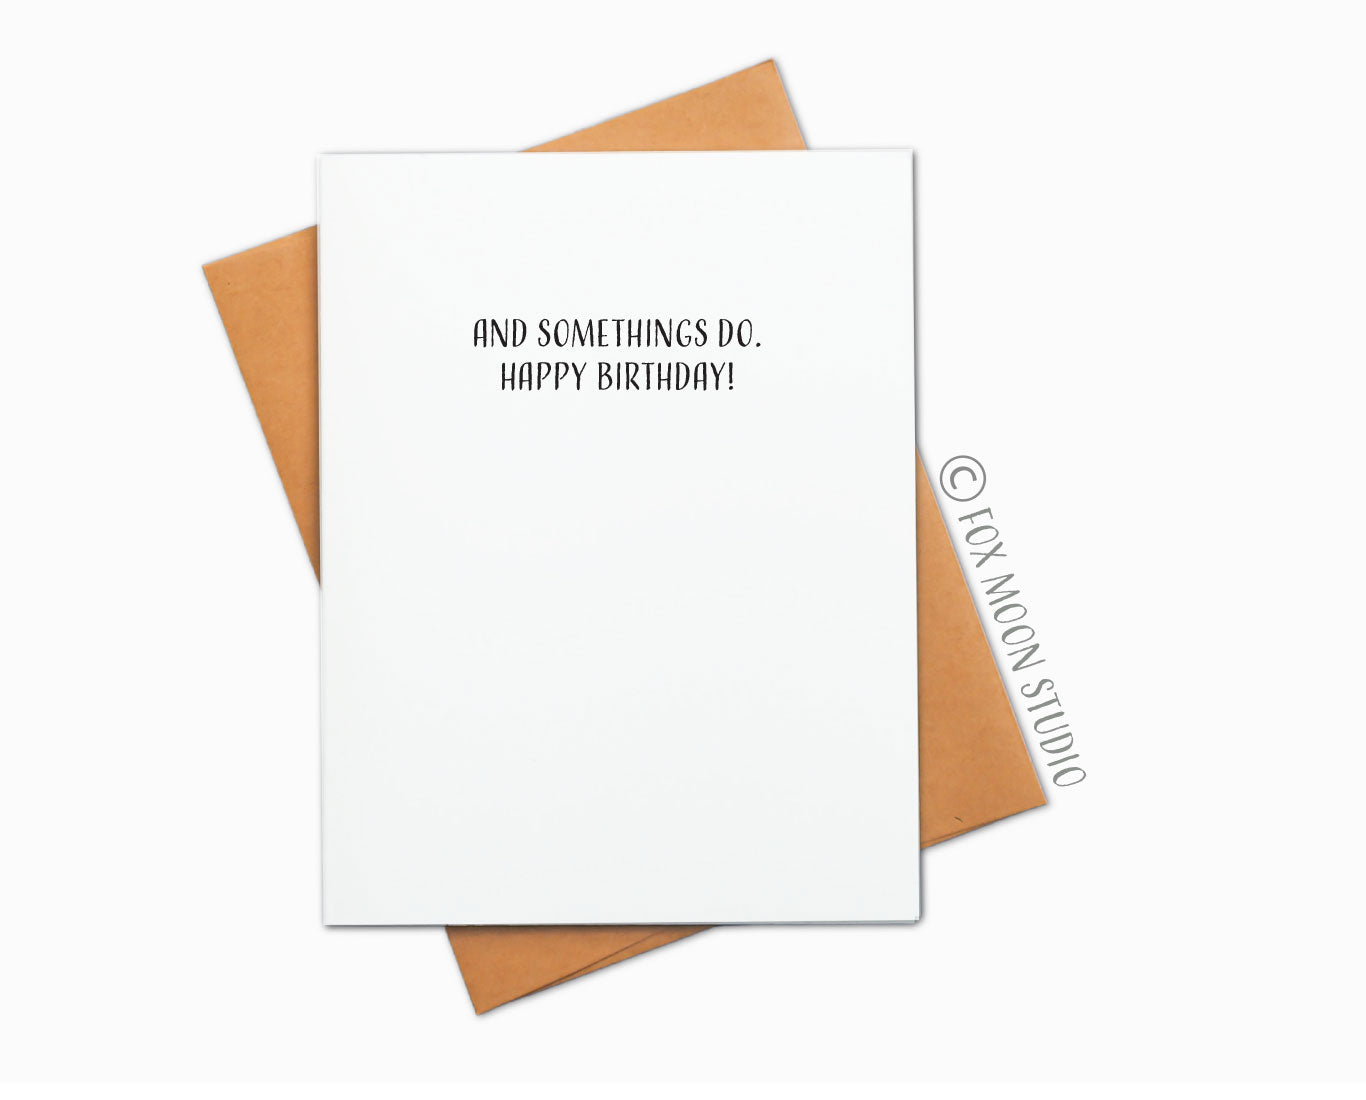 Some Things Never Get Old - Humor Birthday Greeting Card